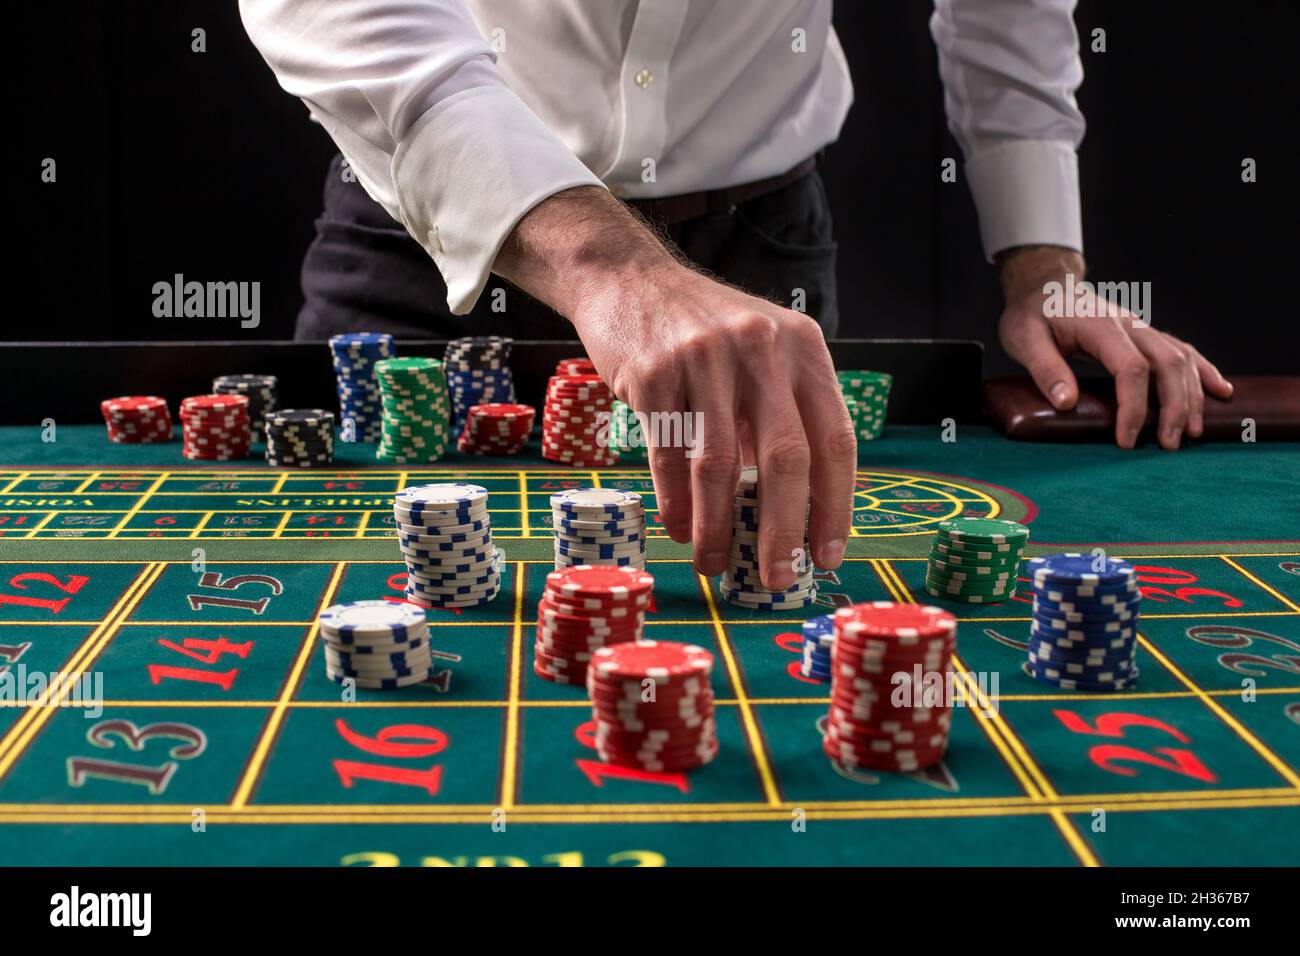 Casino table with roulette and chips Stock Photo - Alamy